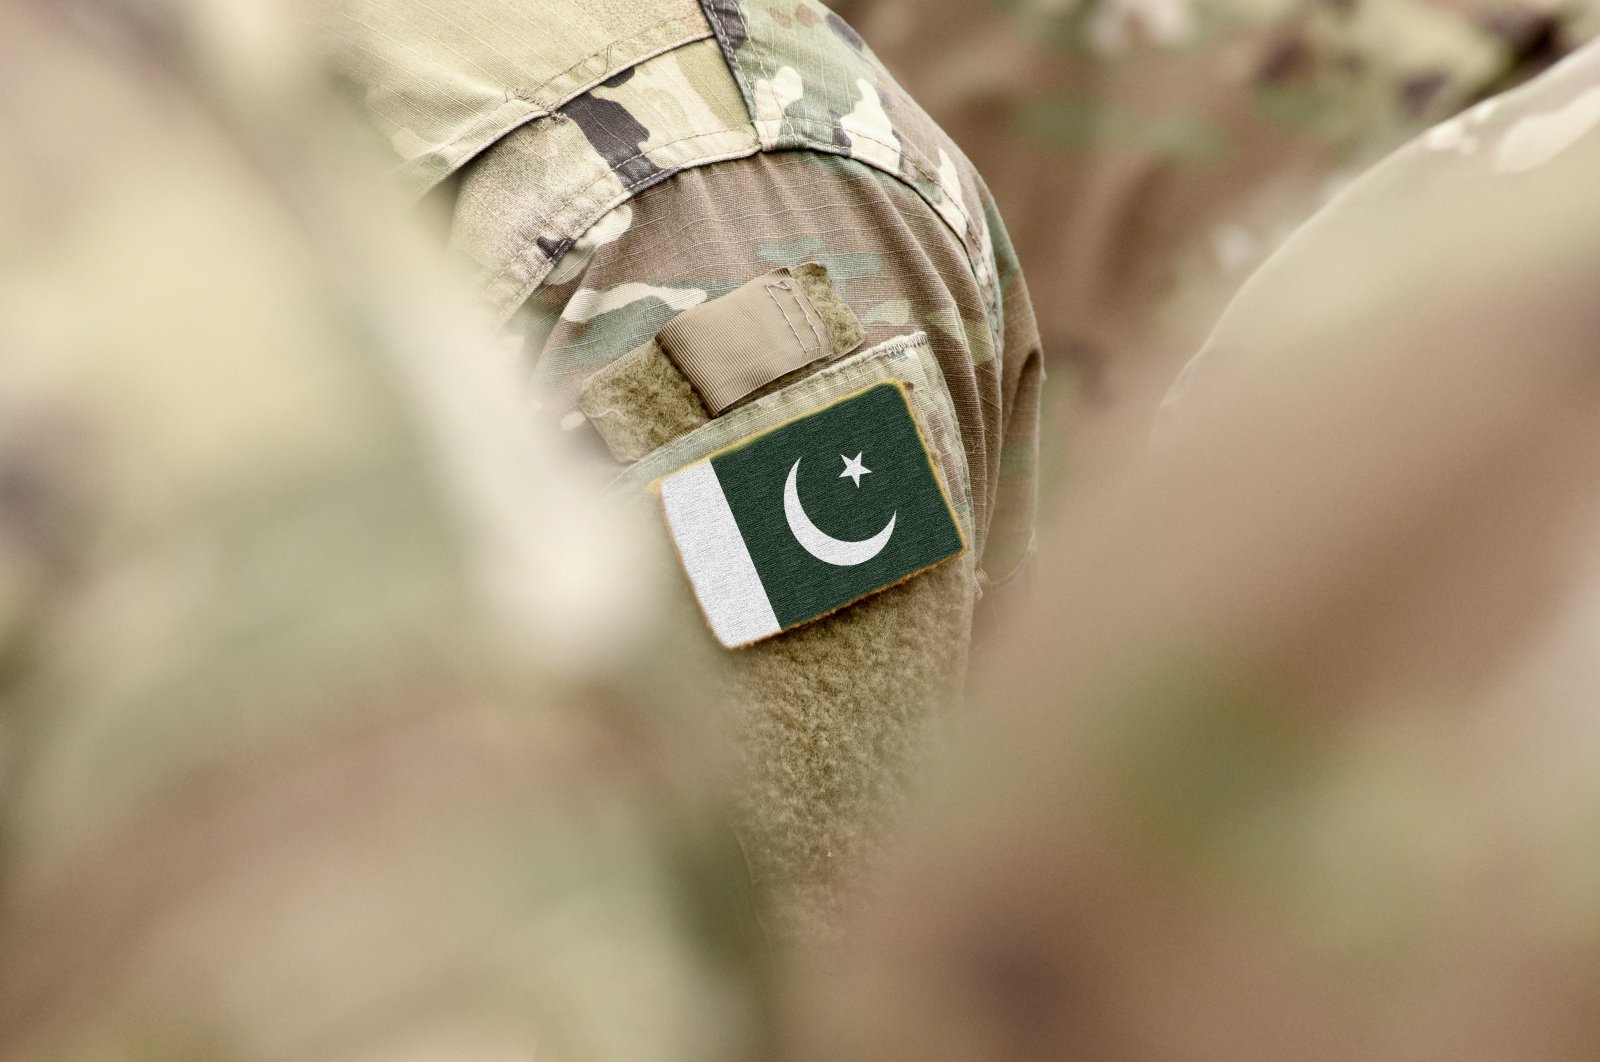 Pakistan&#039;s flag is seen on military uniforms in this undated photo. (ShutterStock Photo)